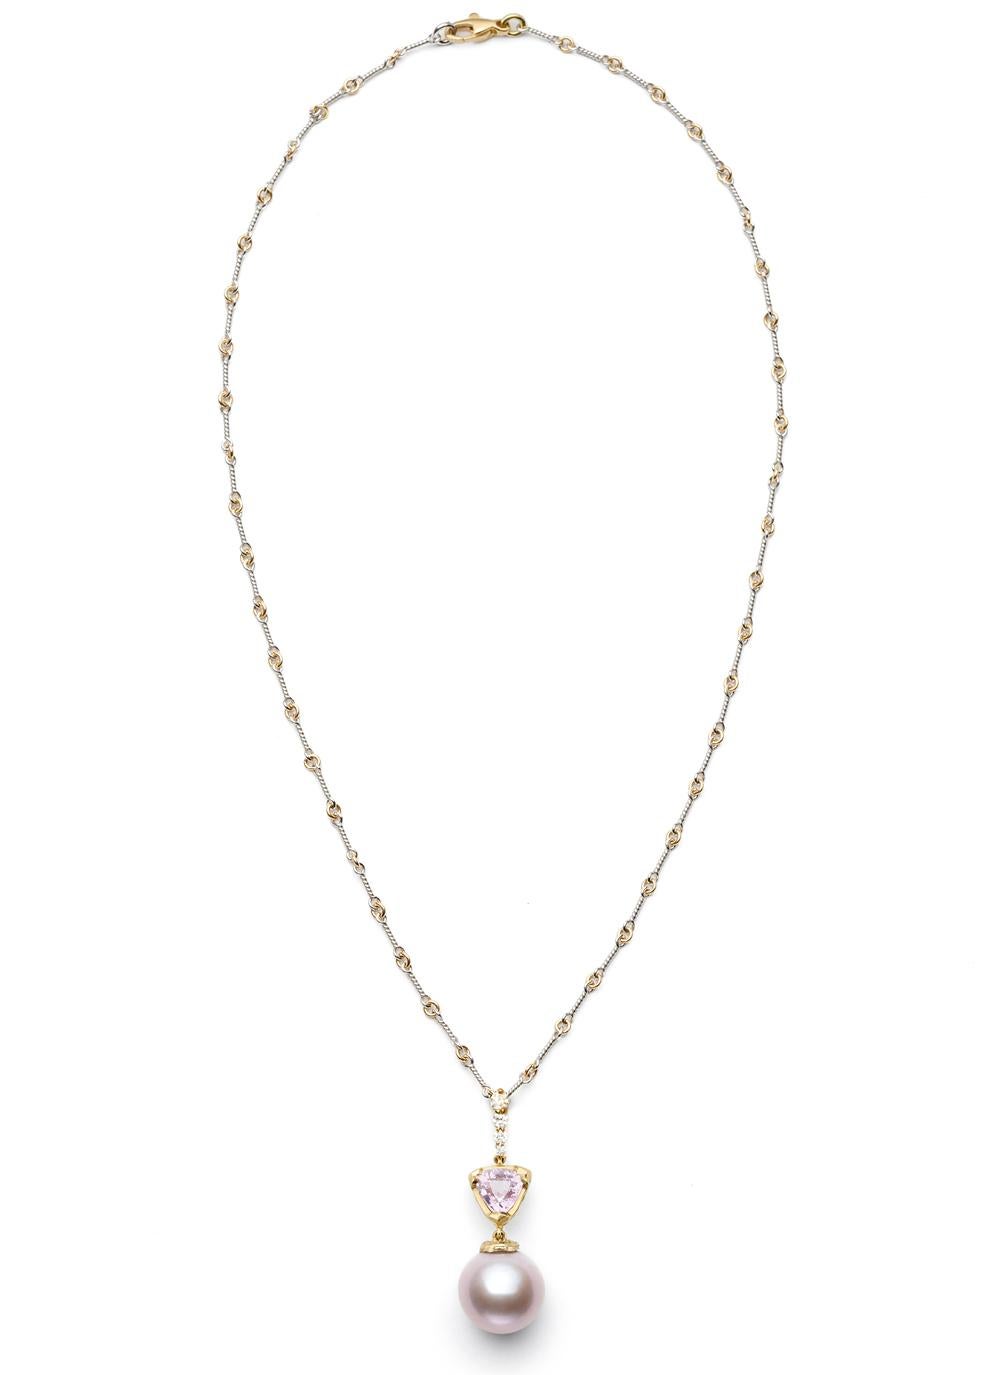 Trillion Cut Susan Lister Locke Pink South Sea Pearl and Sapphire Pendant with Diamond Clasp For Sale